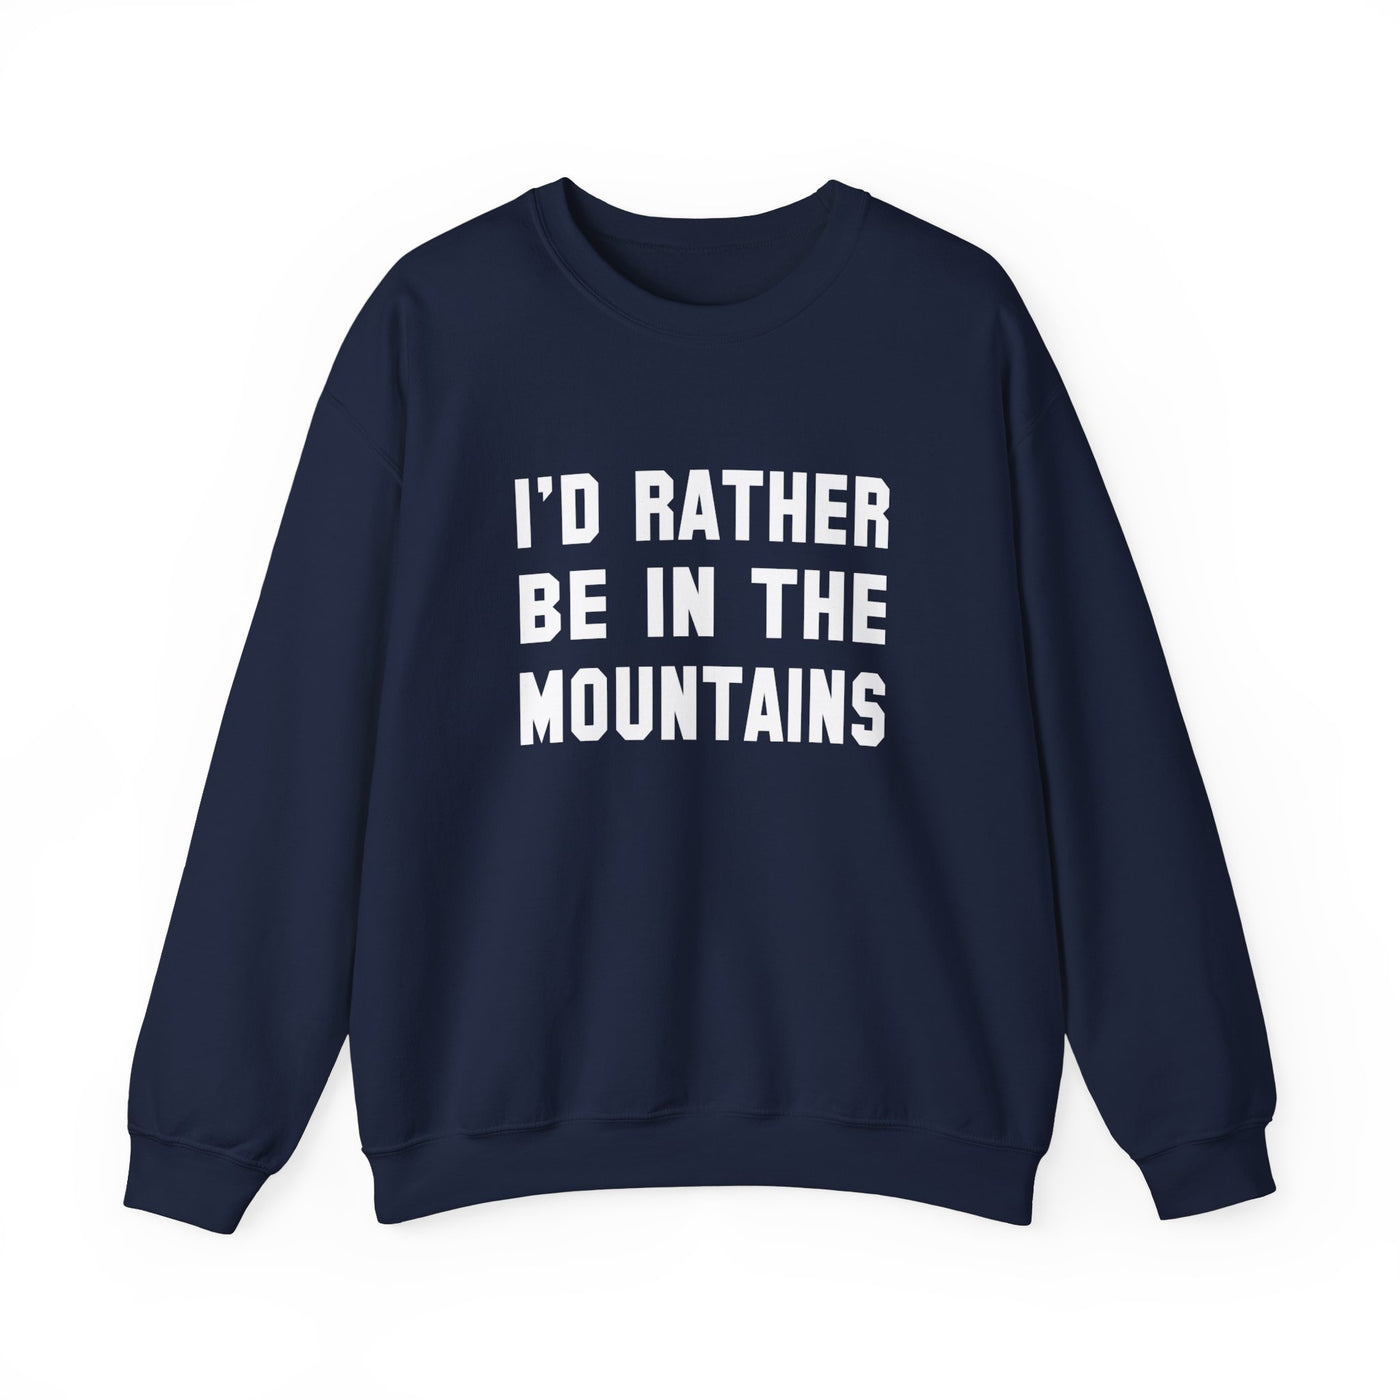 I'd Rather Be In The Mountains Crewneck Sweatshirt